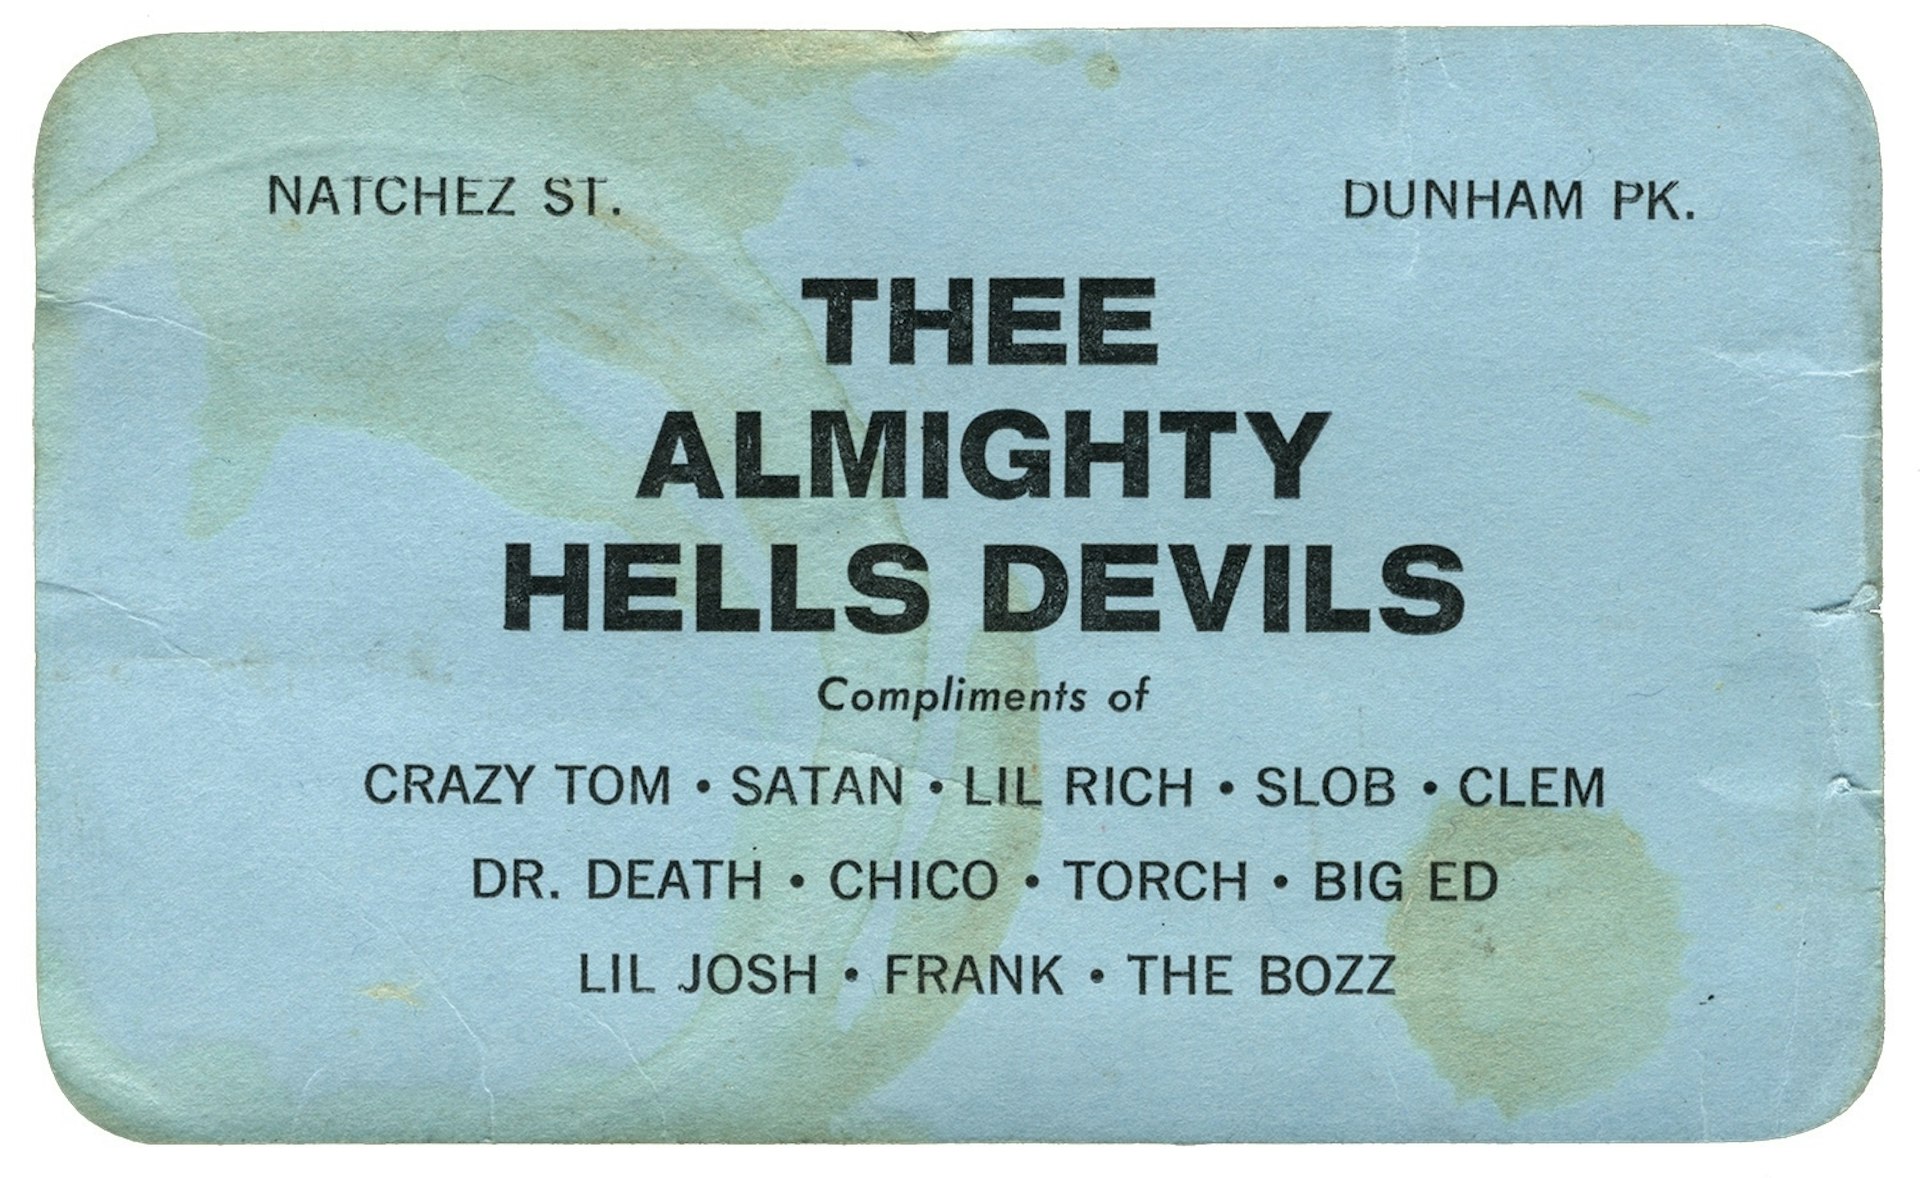 Unearthing the old business cards of Chicago gangs